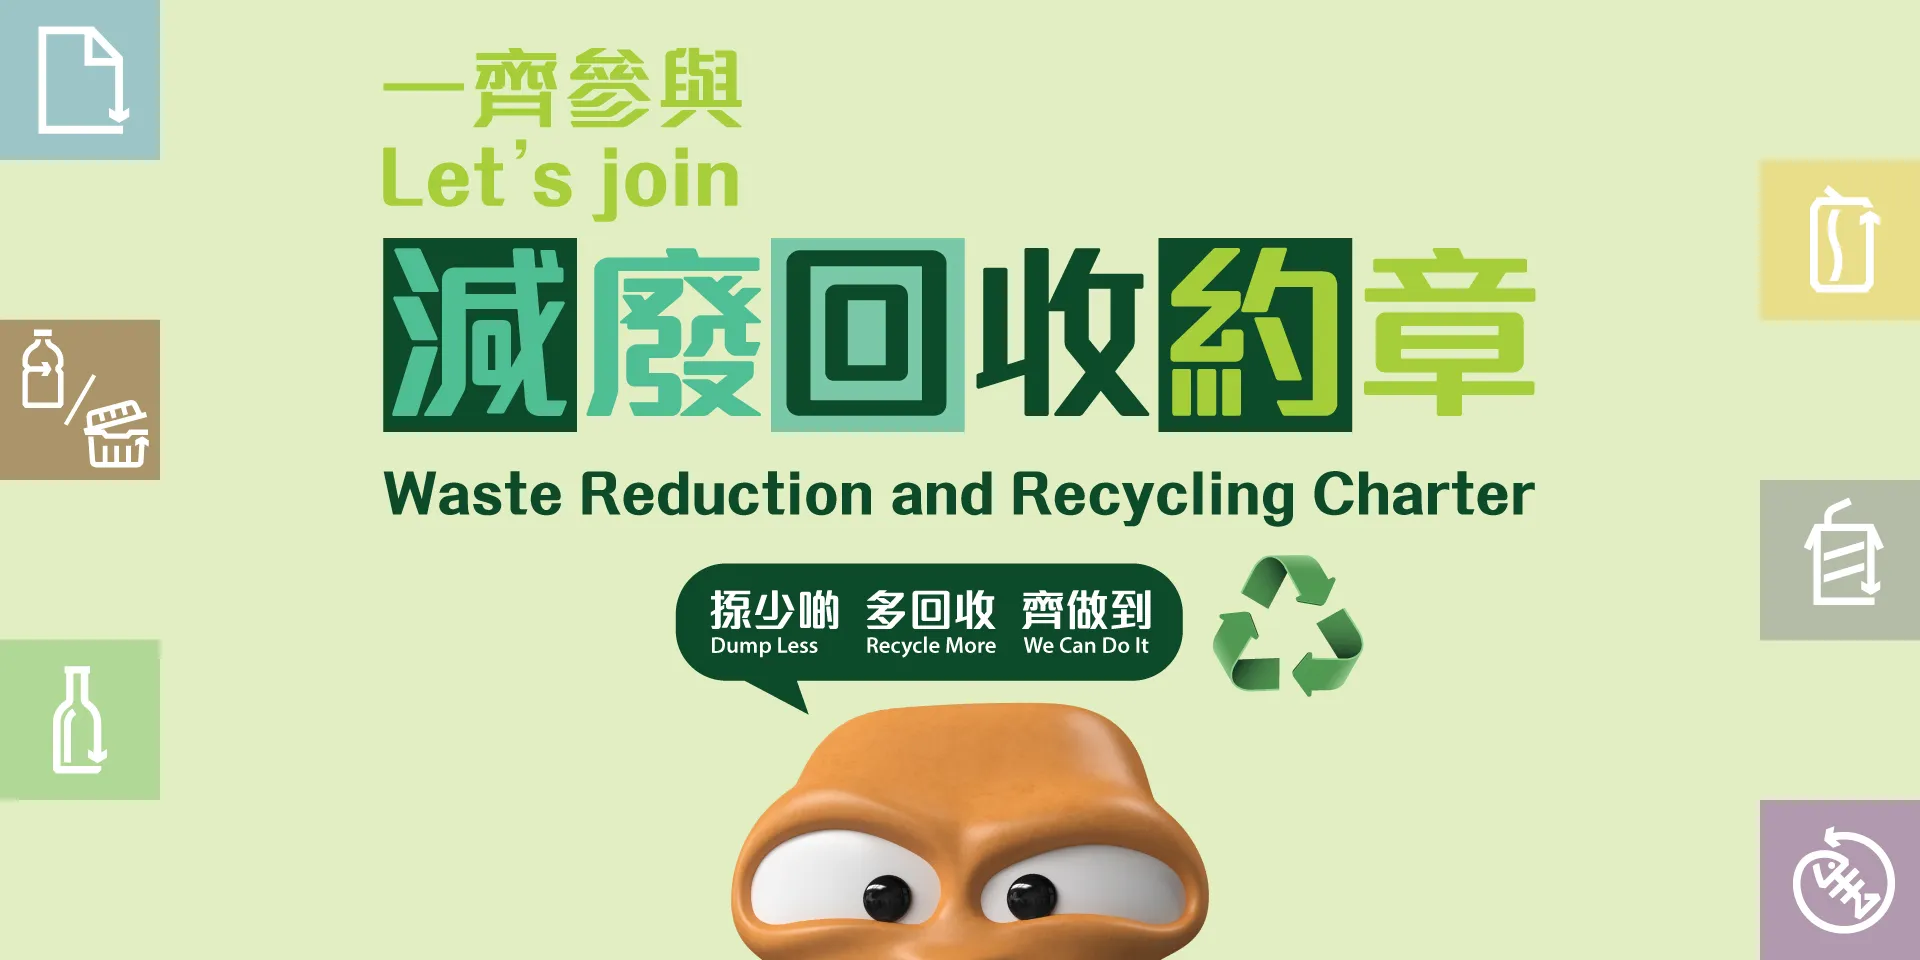 Waste Reduction and Recycling Charter